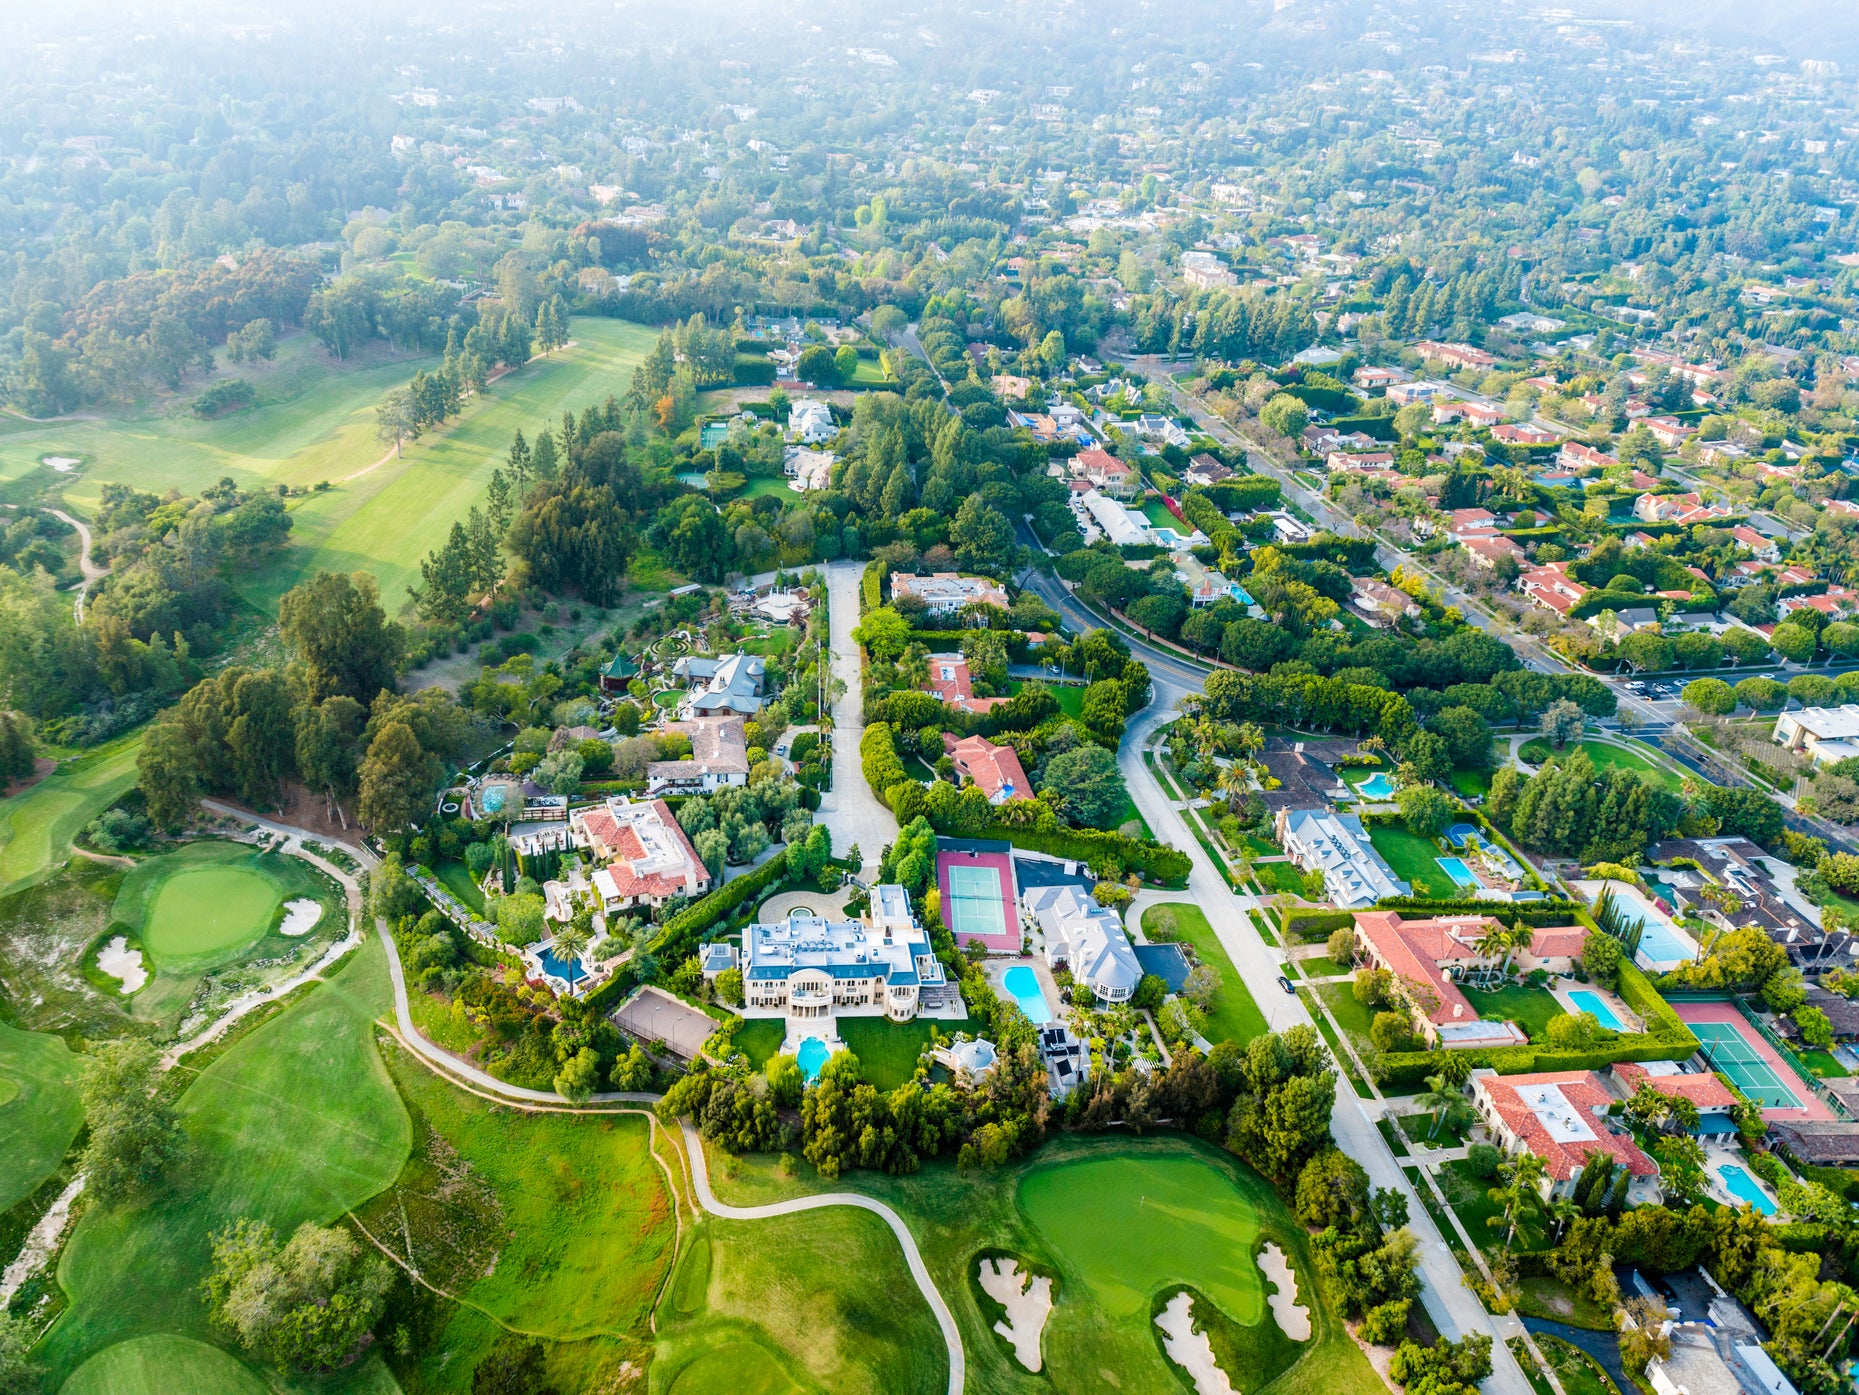 Bel Air Los Angeles mansions and golf course